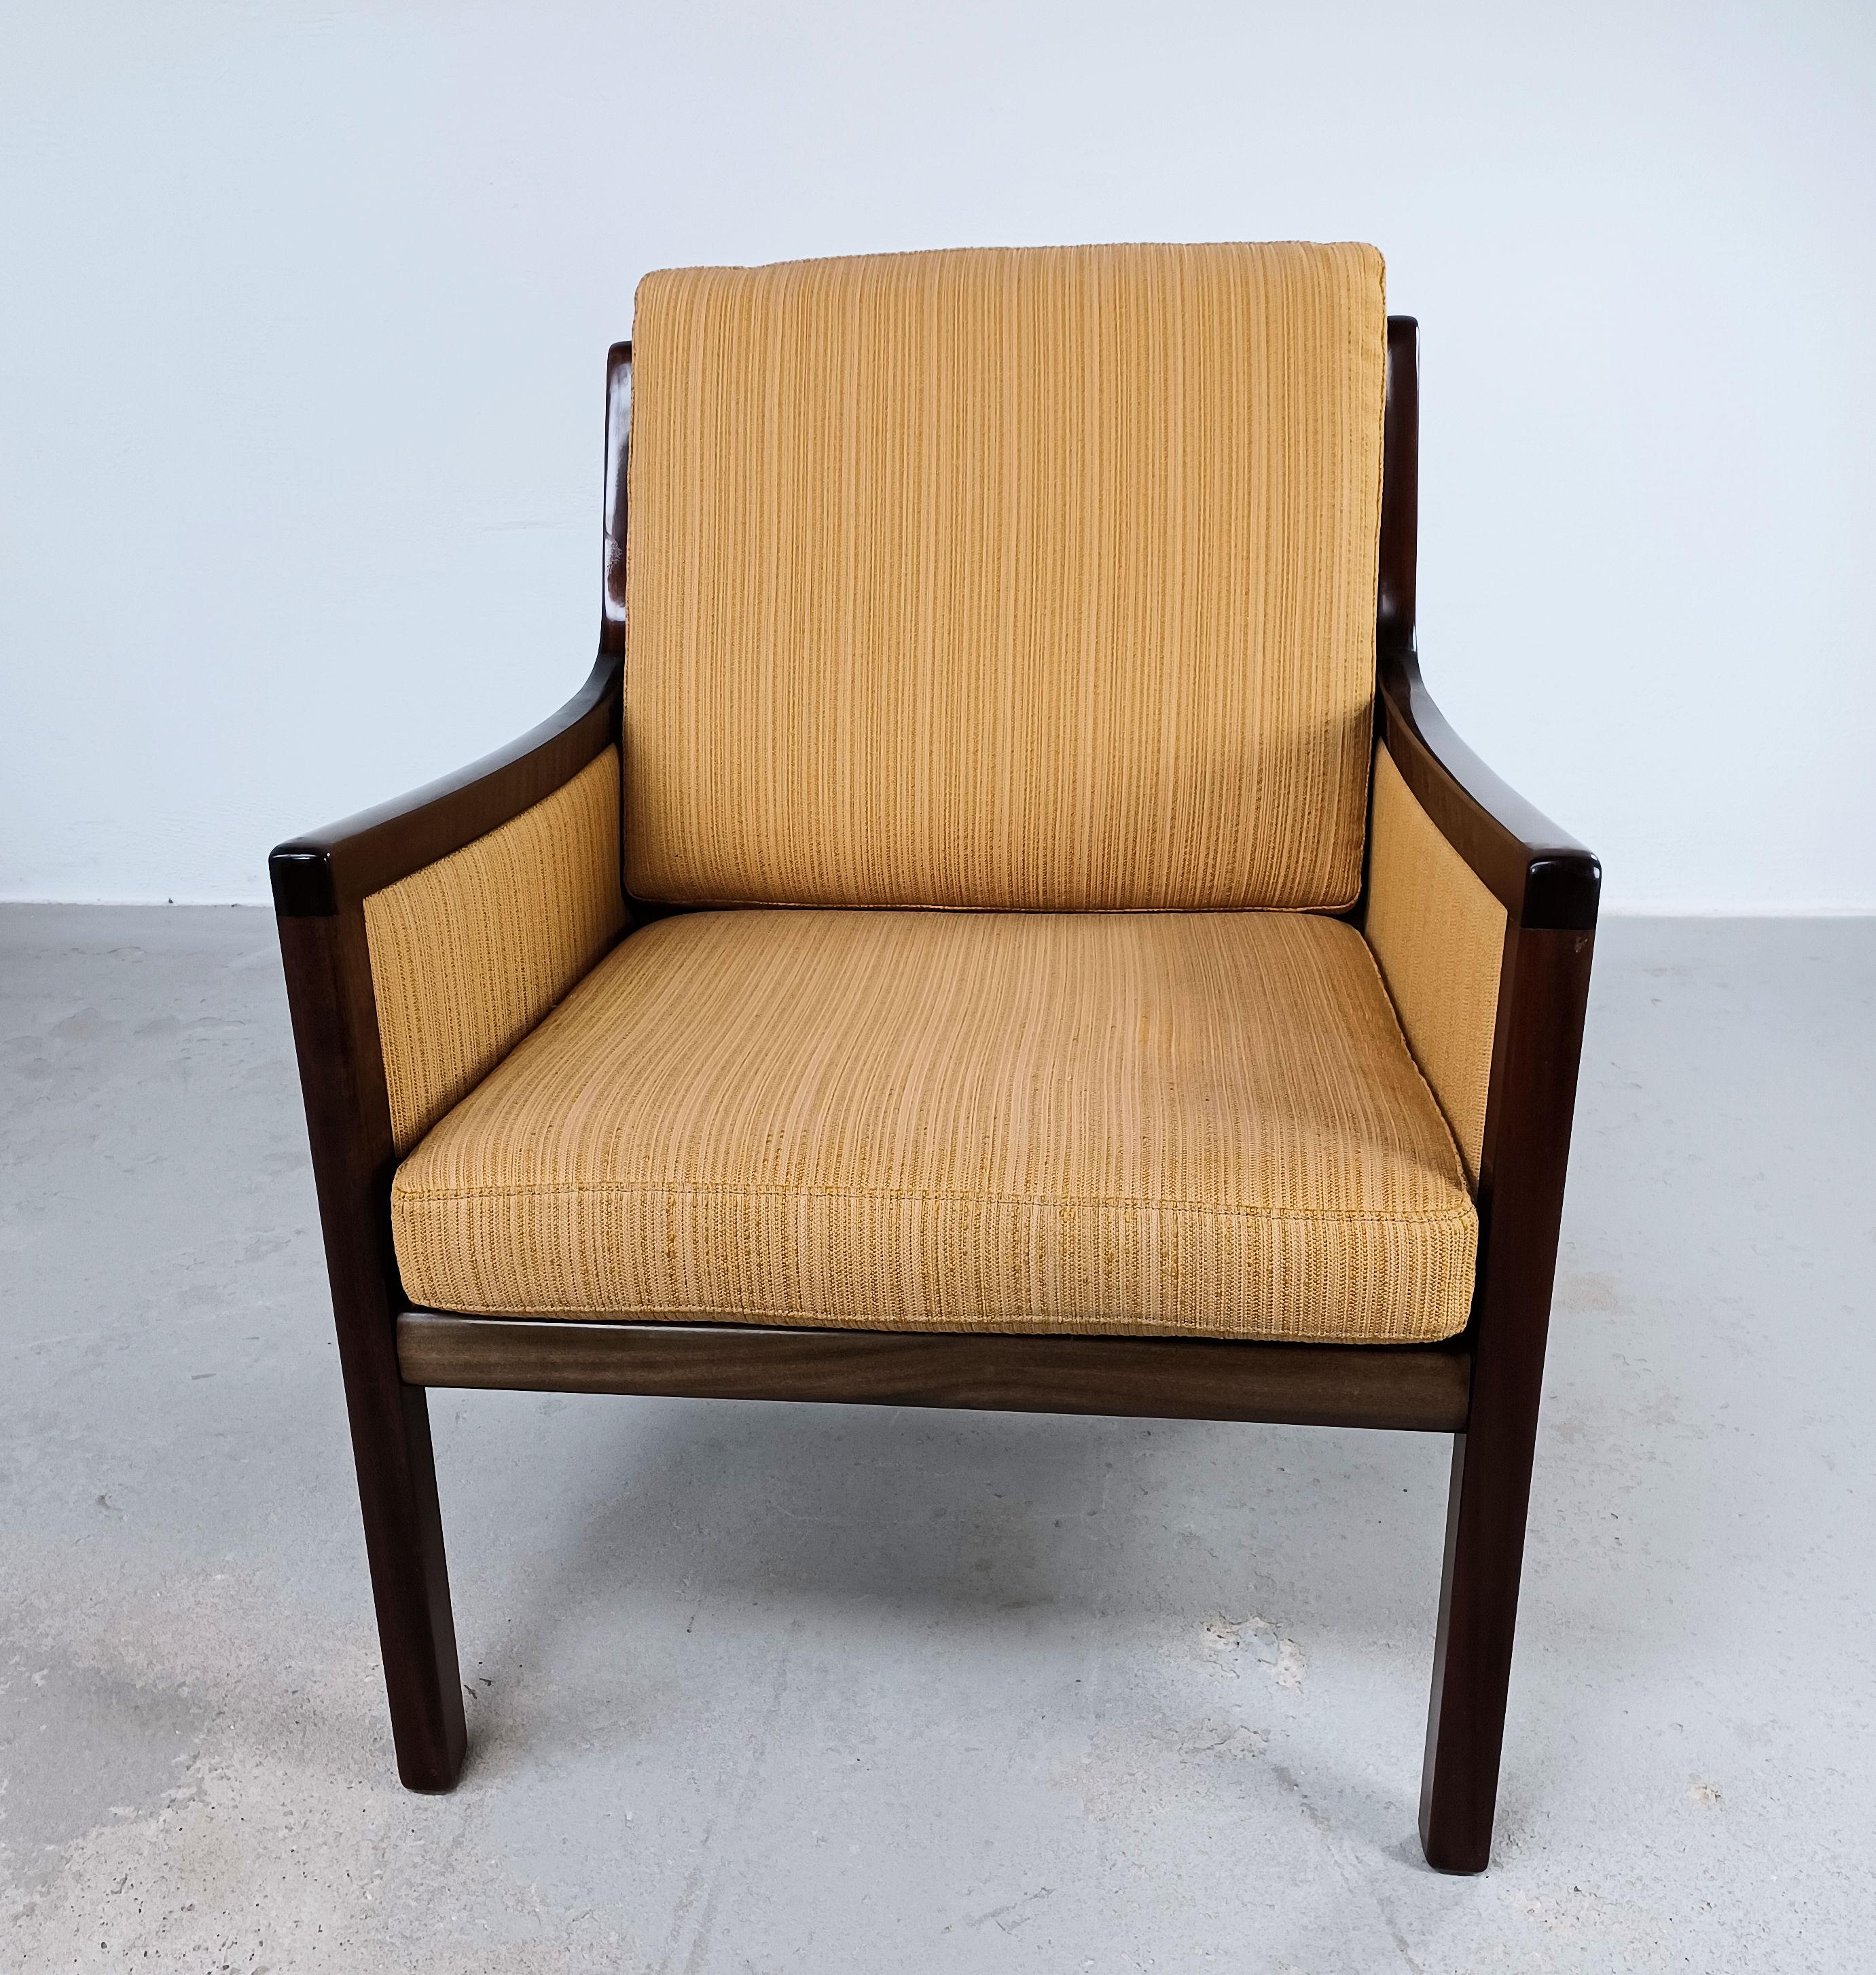 1960s Four fully restored Ole Wanscher mahogny lounge chairs custom Upholstery

The four Ole Wanscher lounge chairs with their modest, Classic shapes testify the simple and refined aesthetic that he achieved by reinventing Classic forms in a